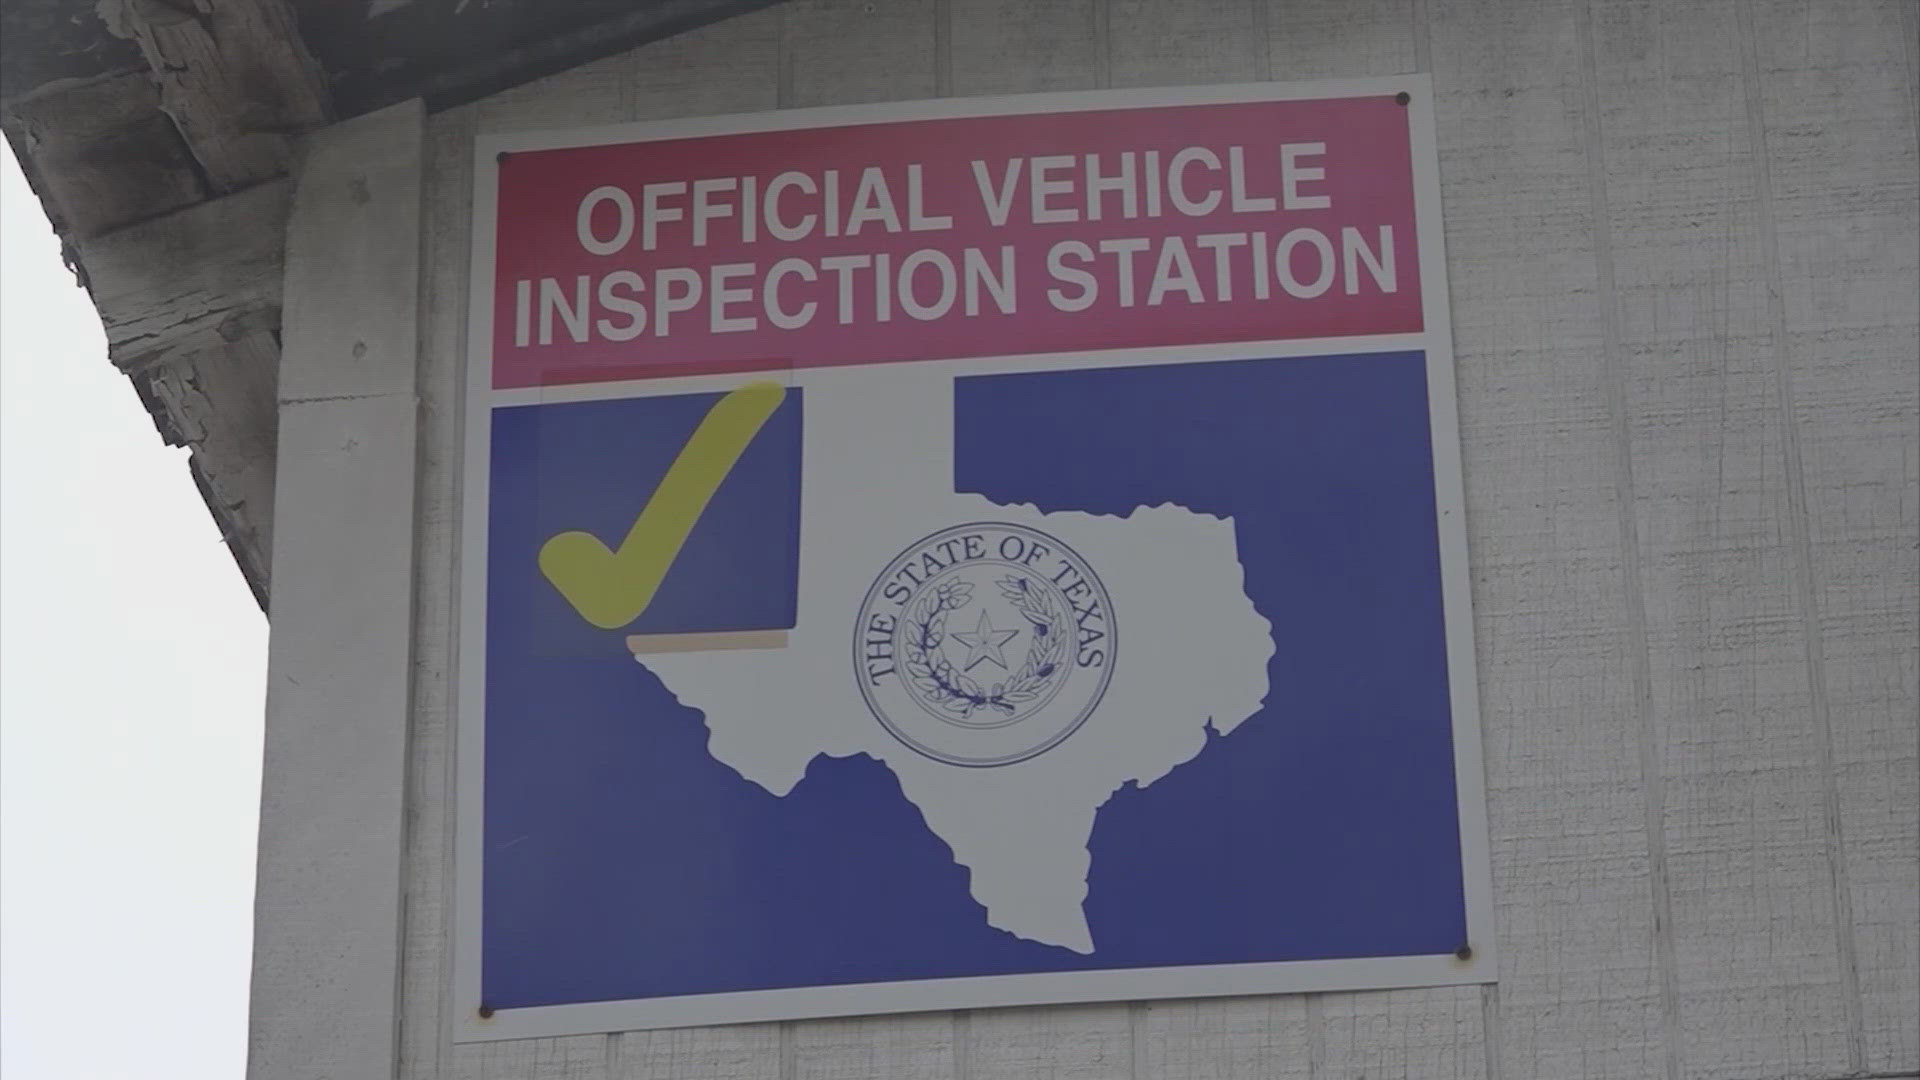 Changes are coming for Texas drivers. In less than six months, drivers will not be required to an annual car safety inspection.